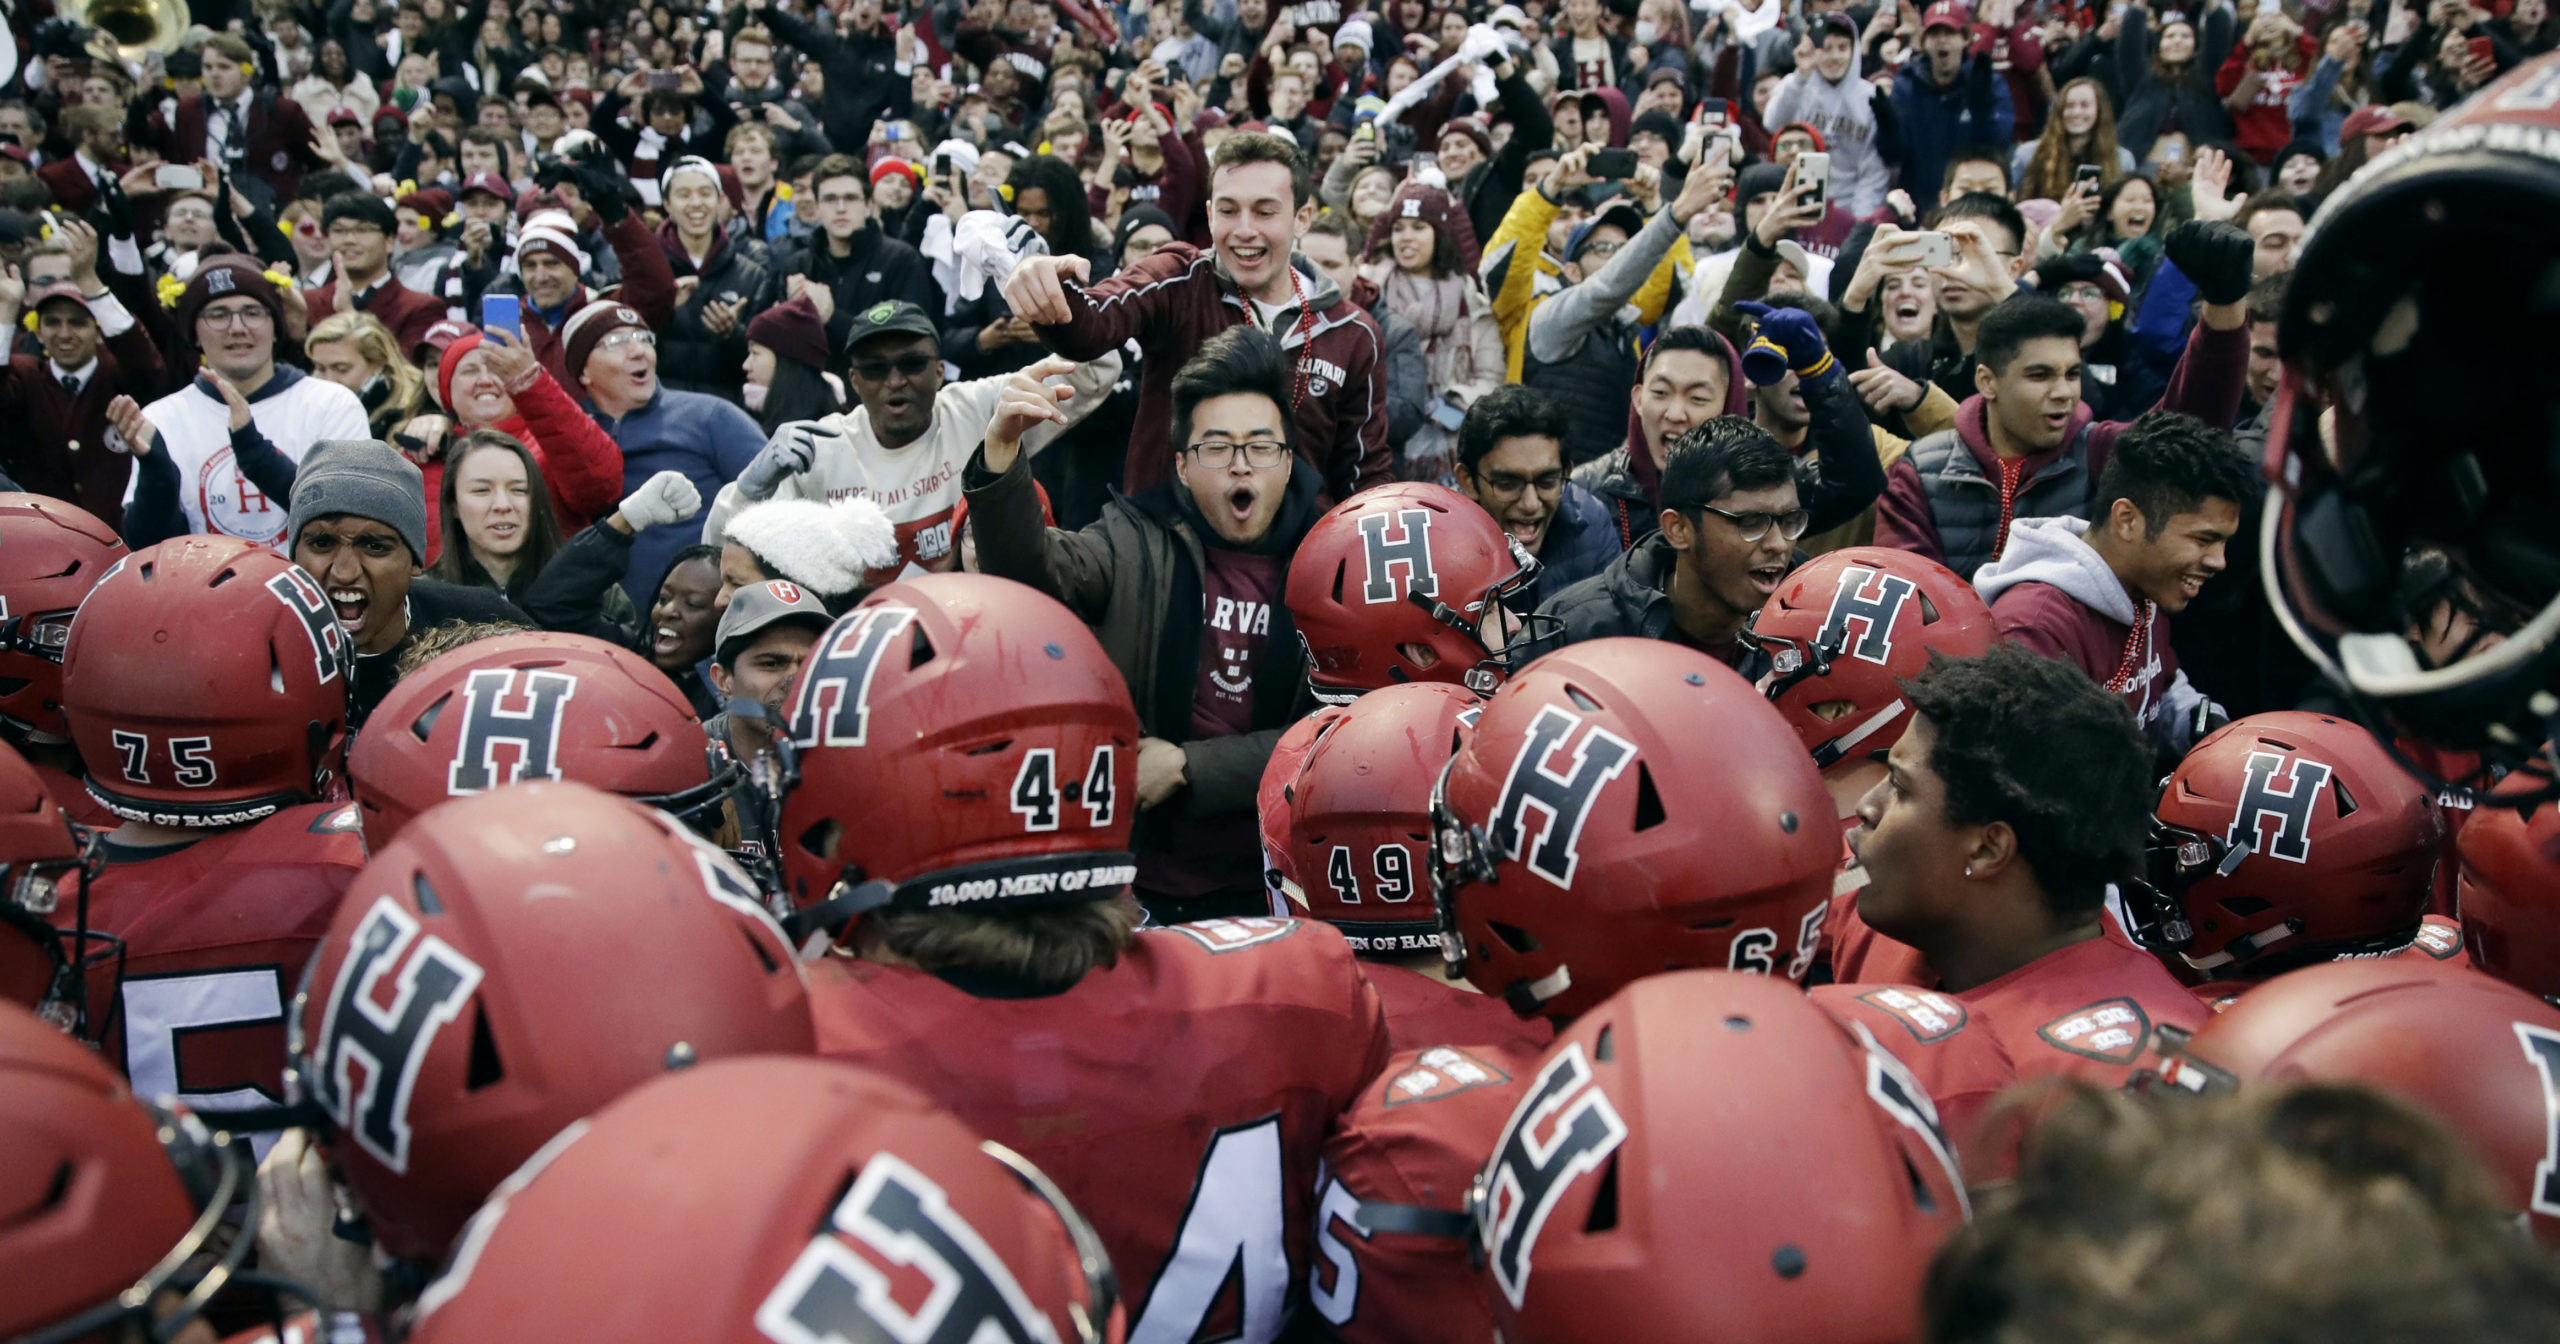 In this Nov. 17, 2018, file photo, Harvard players, students and fans celebrate their 45-27 win over Yale after an NCAA college football game at Fenway Park in Boston. The Ivy League has canceled all fall sports because of the coronavirus pandemic.